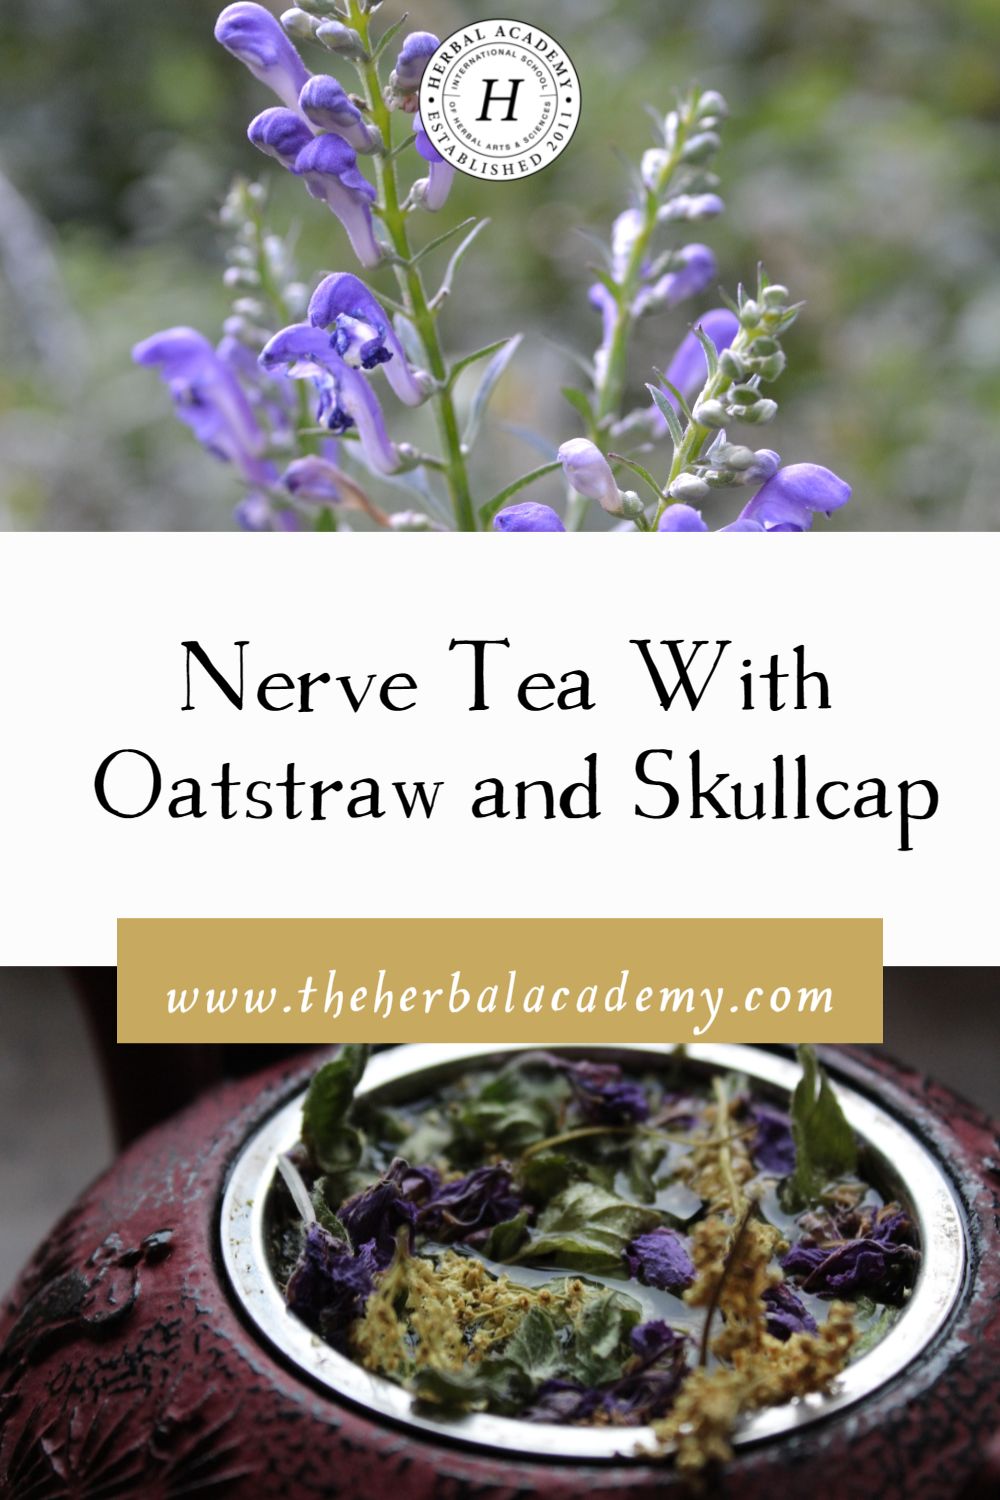 Nerve Tea with Oatstraw and Skullcap | Herbal Academy | Integrating this nerve tea recipe can help nourish a frayed nervous system while soothing the effects of constant nervous system stimulus.